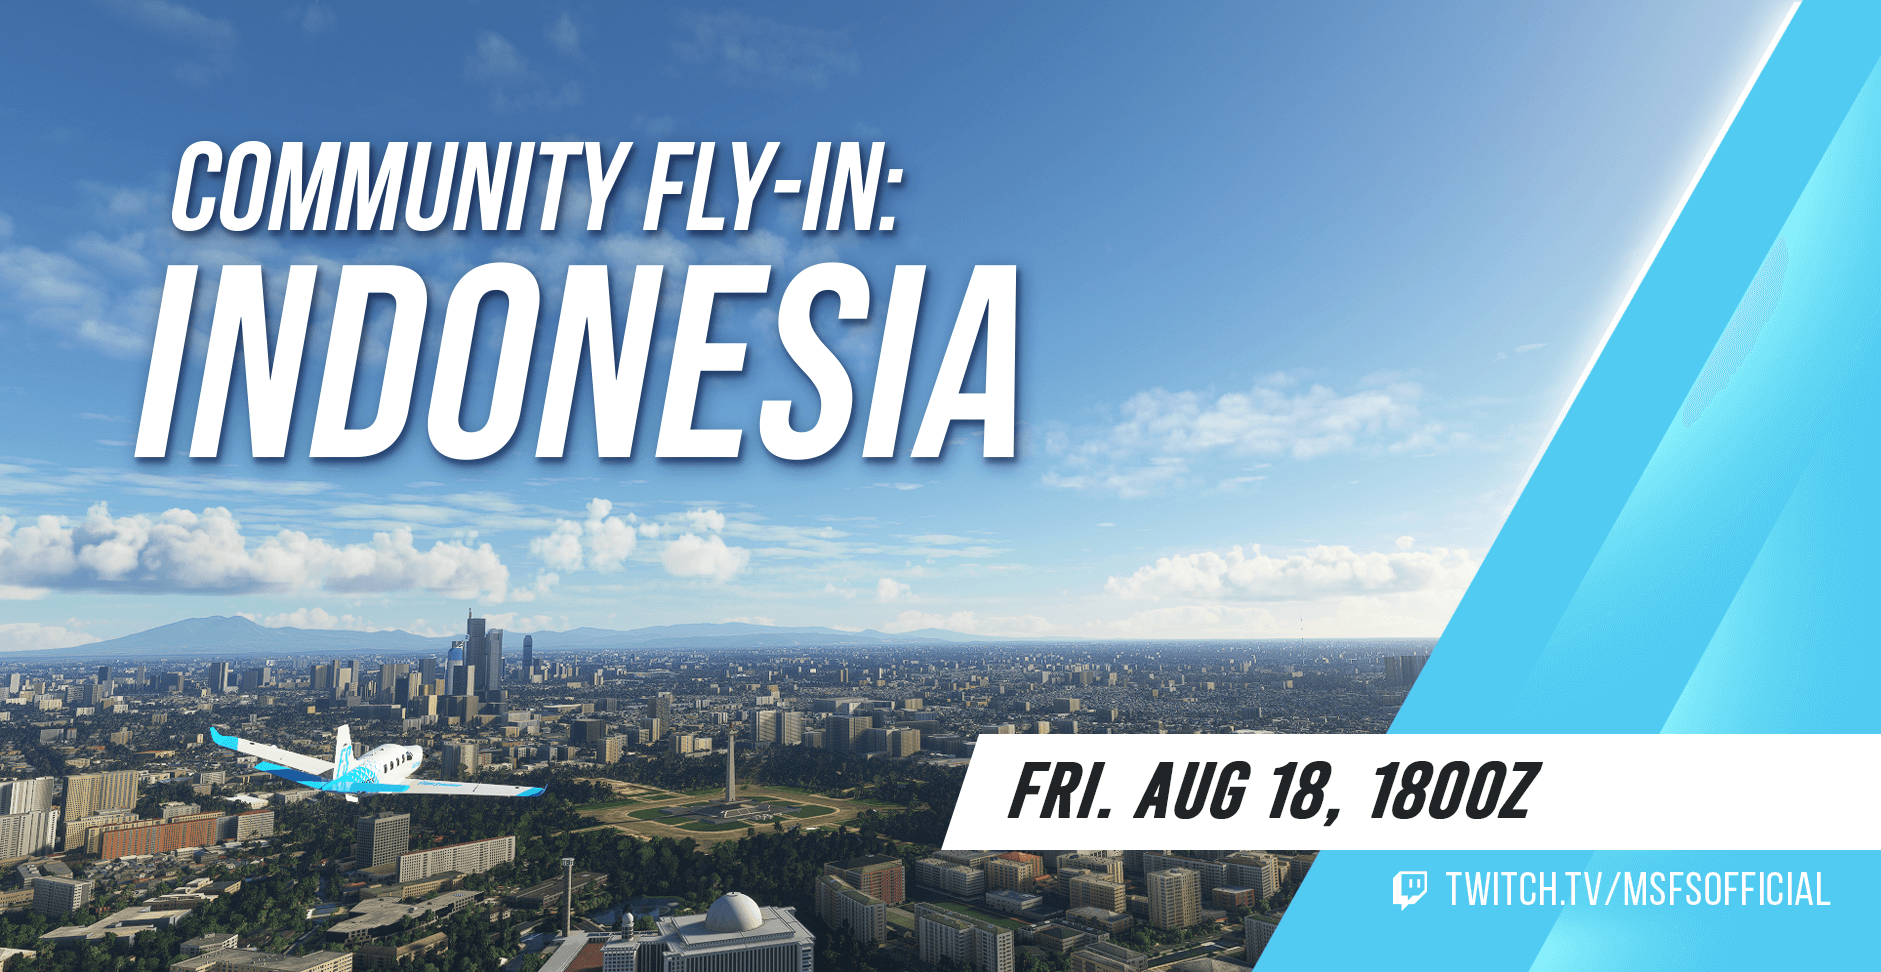 An aircraft flies over Jakarta. Community Fly-In: Indonesia. Join us on Friday August 18th at 1800Z. Watch at twitch.tv/msfsofficial!